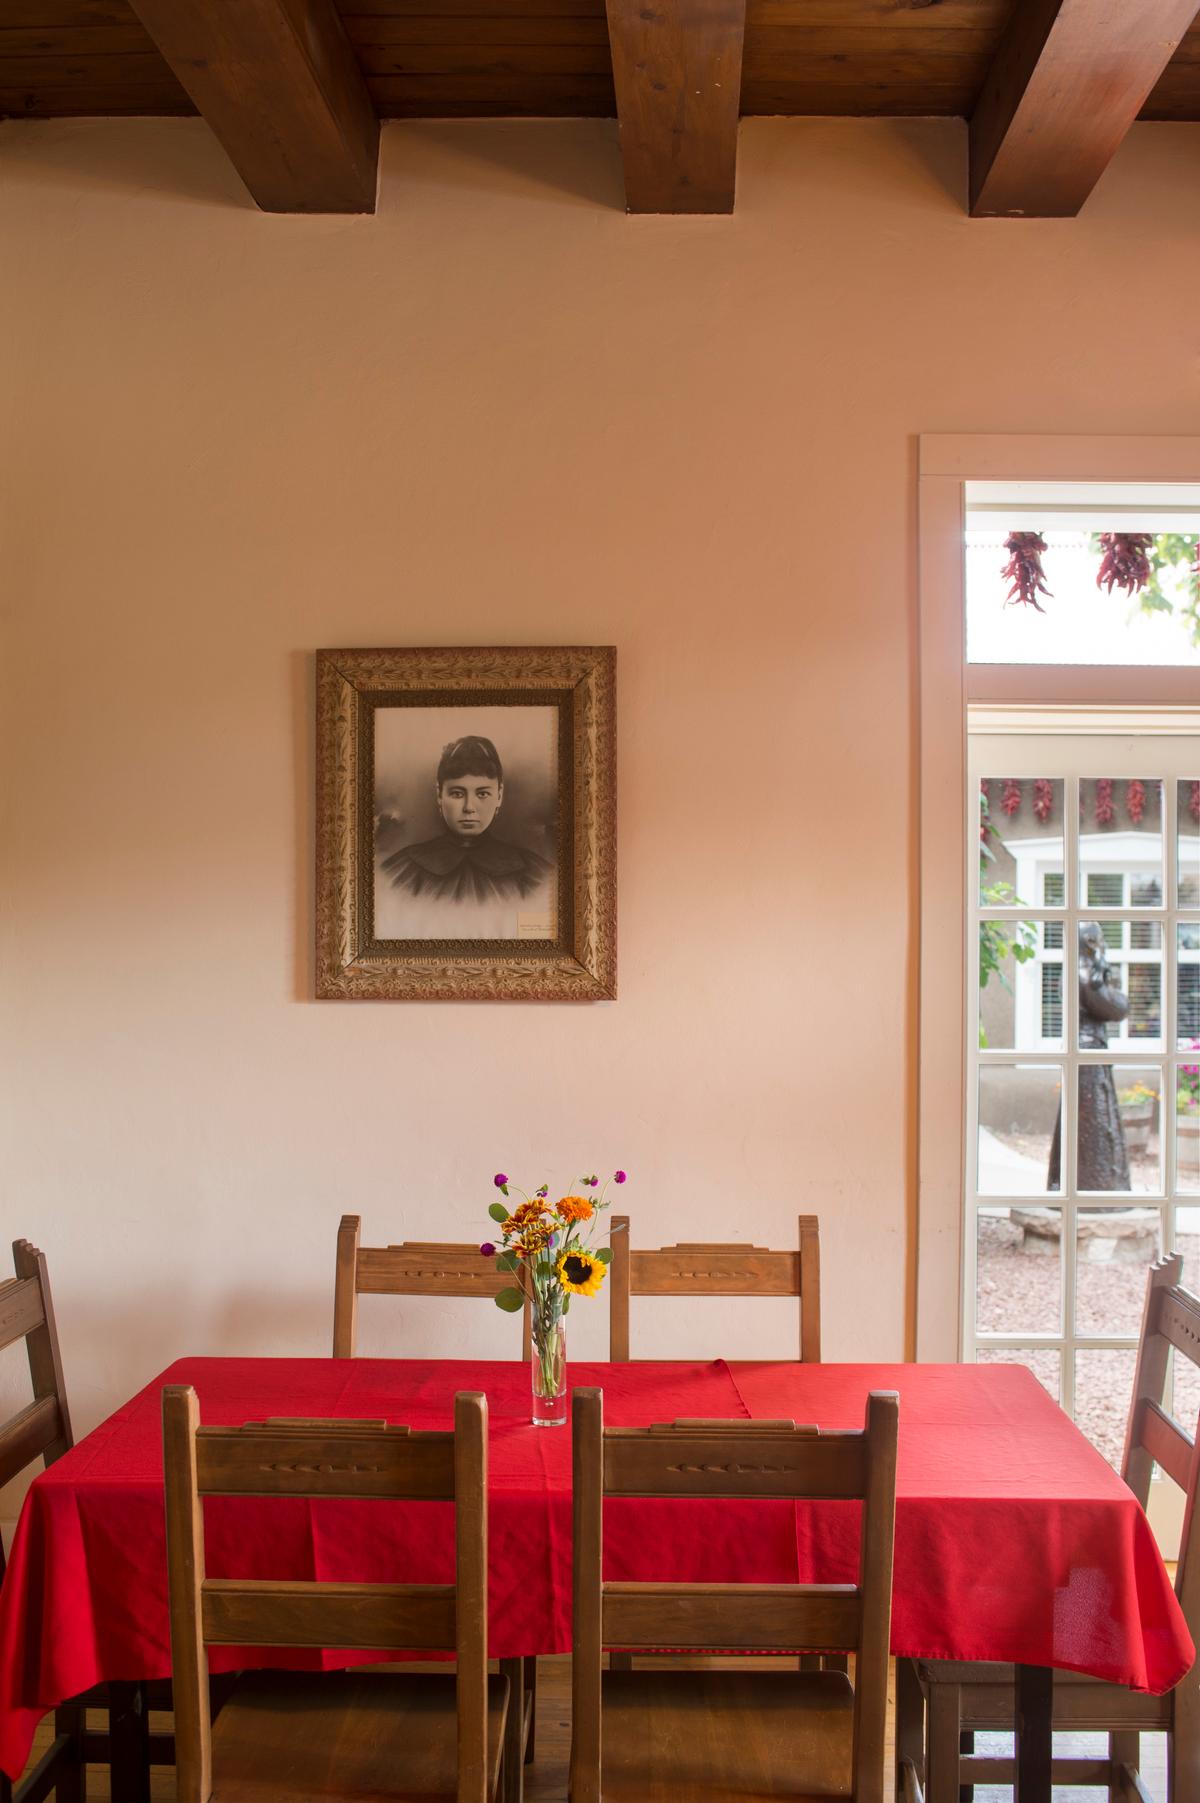 The restaurant is set in Arturo Jaramillo's ancestral family home, a 19th-century territorial ranch house with adobe walls. The tables and chairs were handmade using the original floorboards. (Chris Corrie Photography)